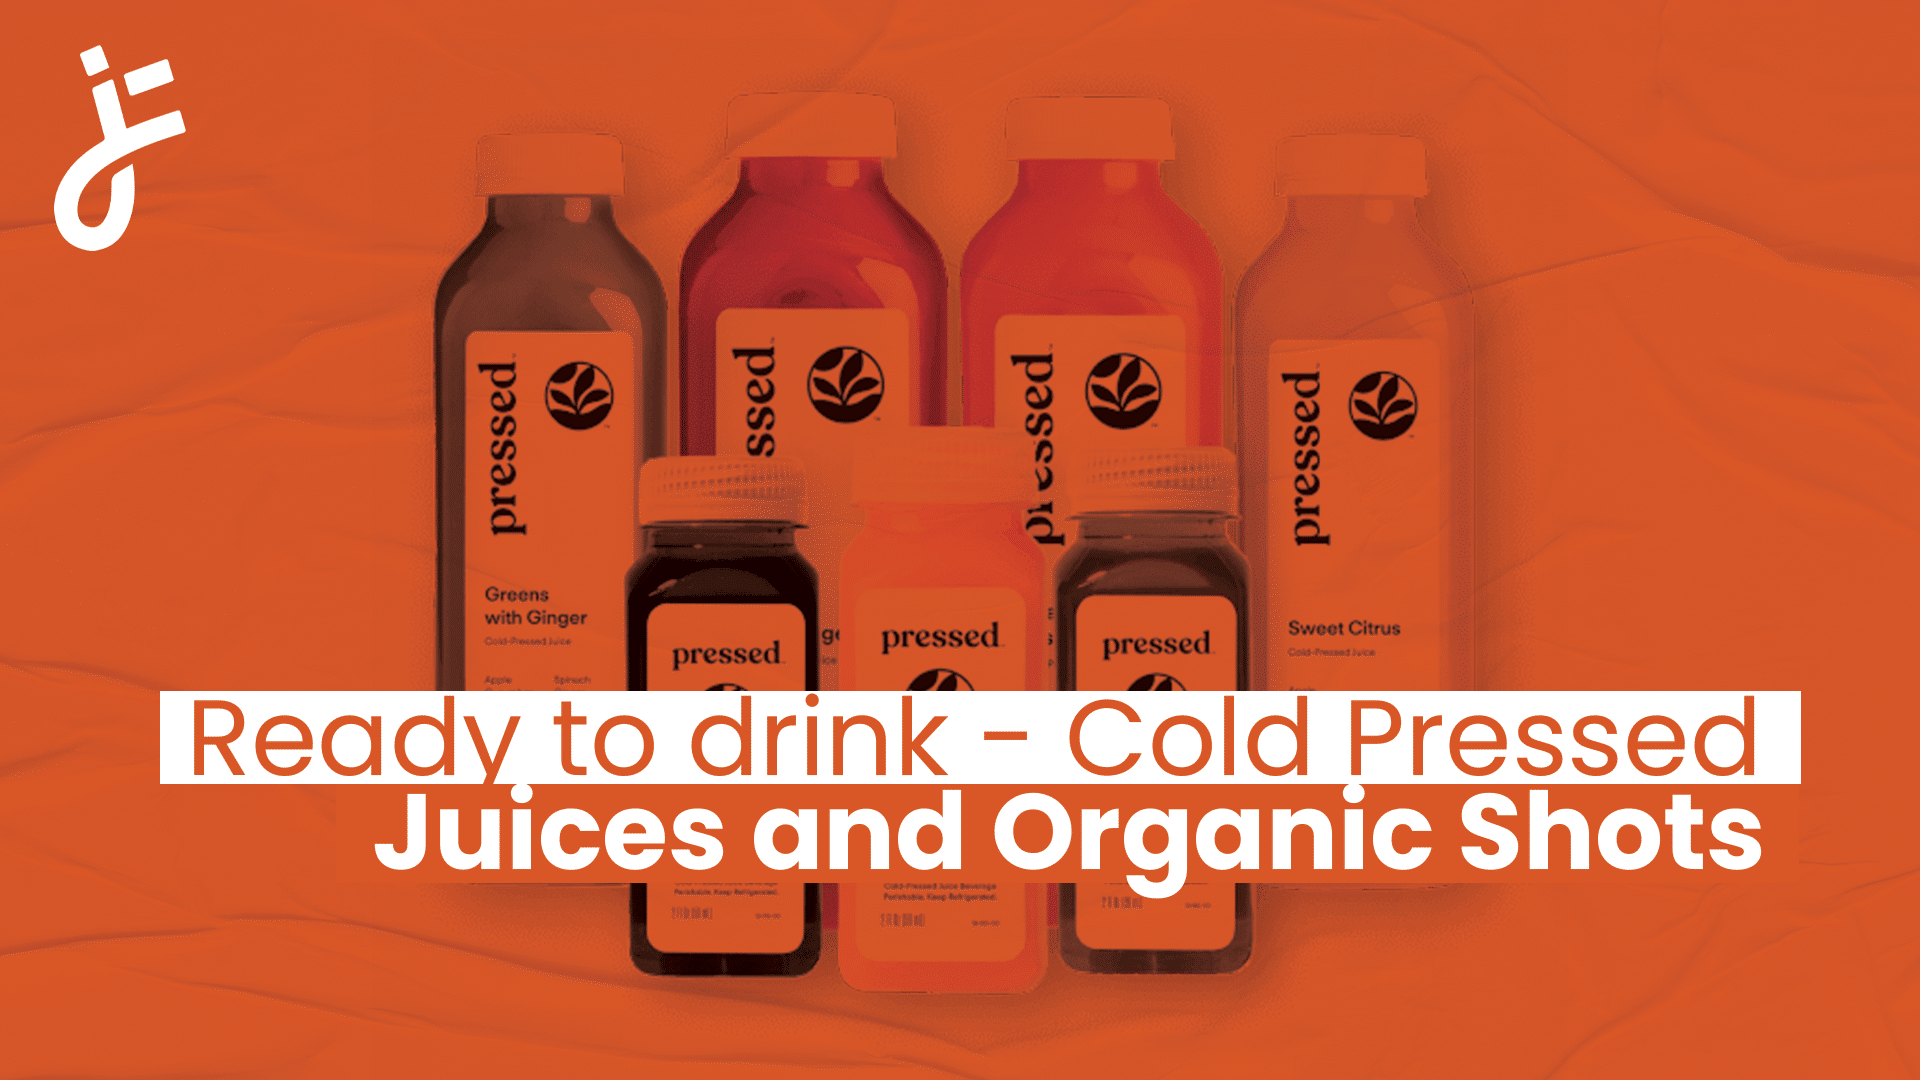 Ready to drink - Cold Pressed Juices and Organic Shots delivery